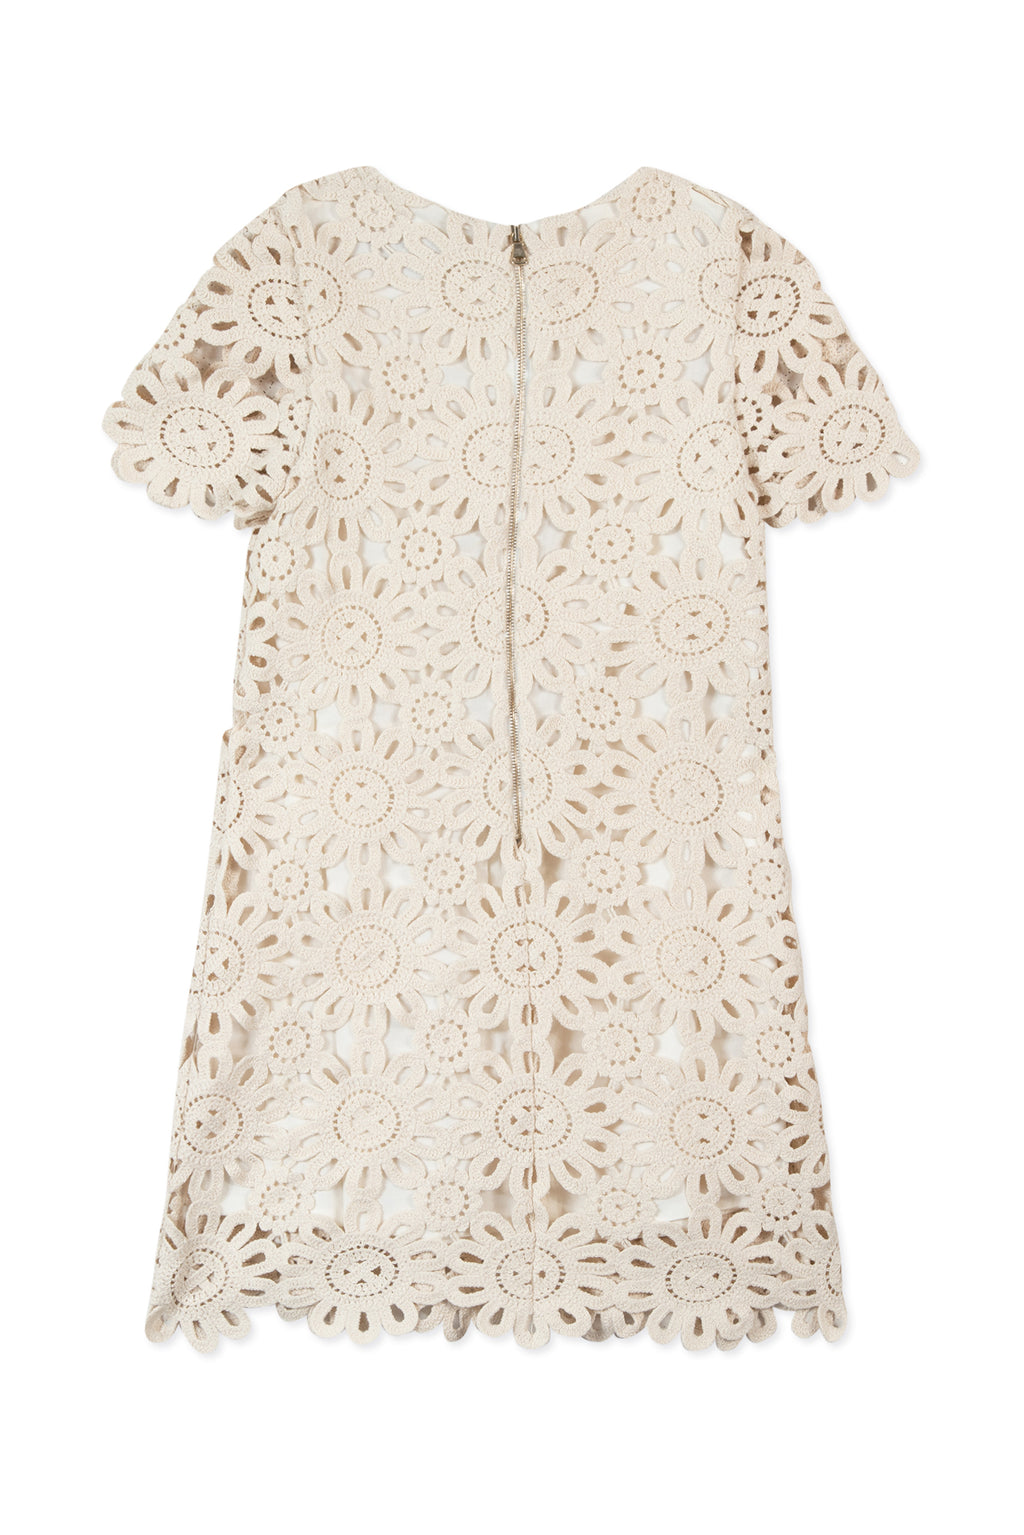 Dress - Beige embroidery